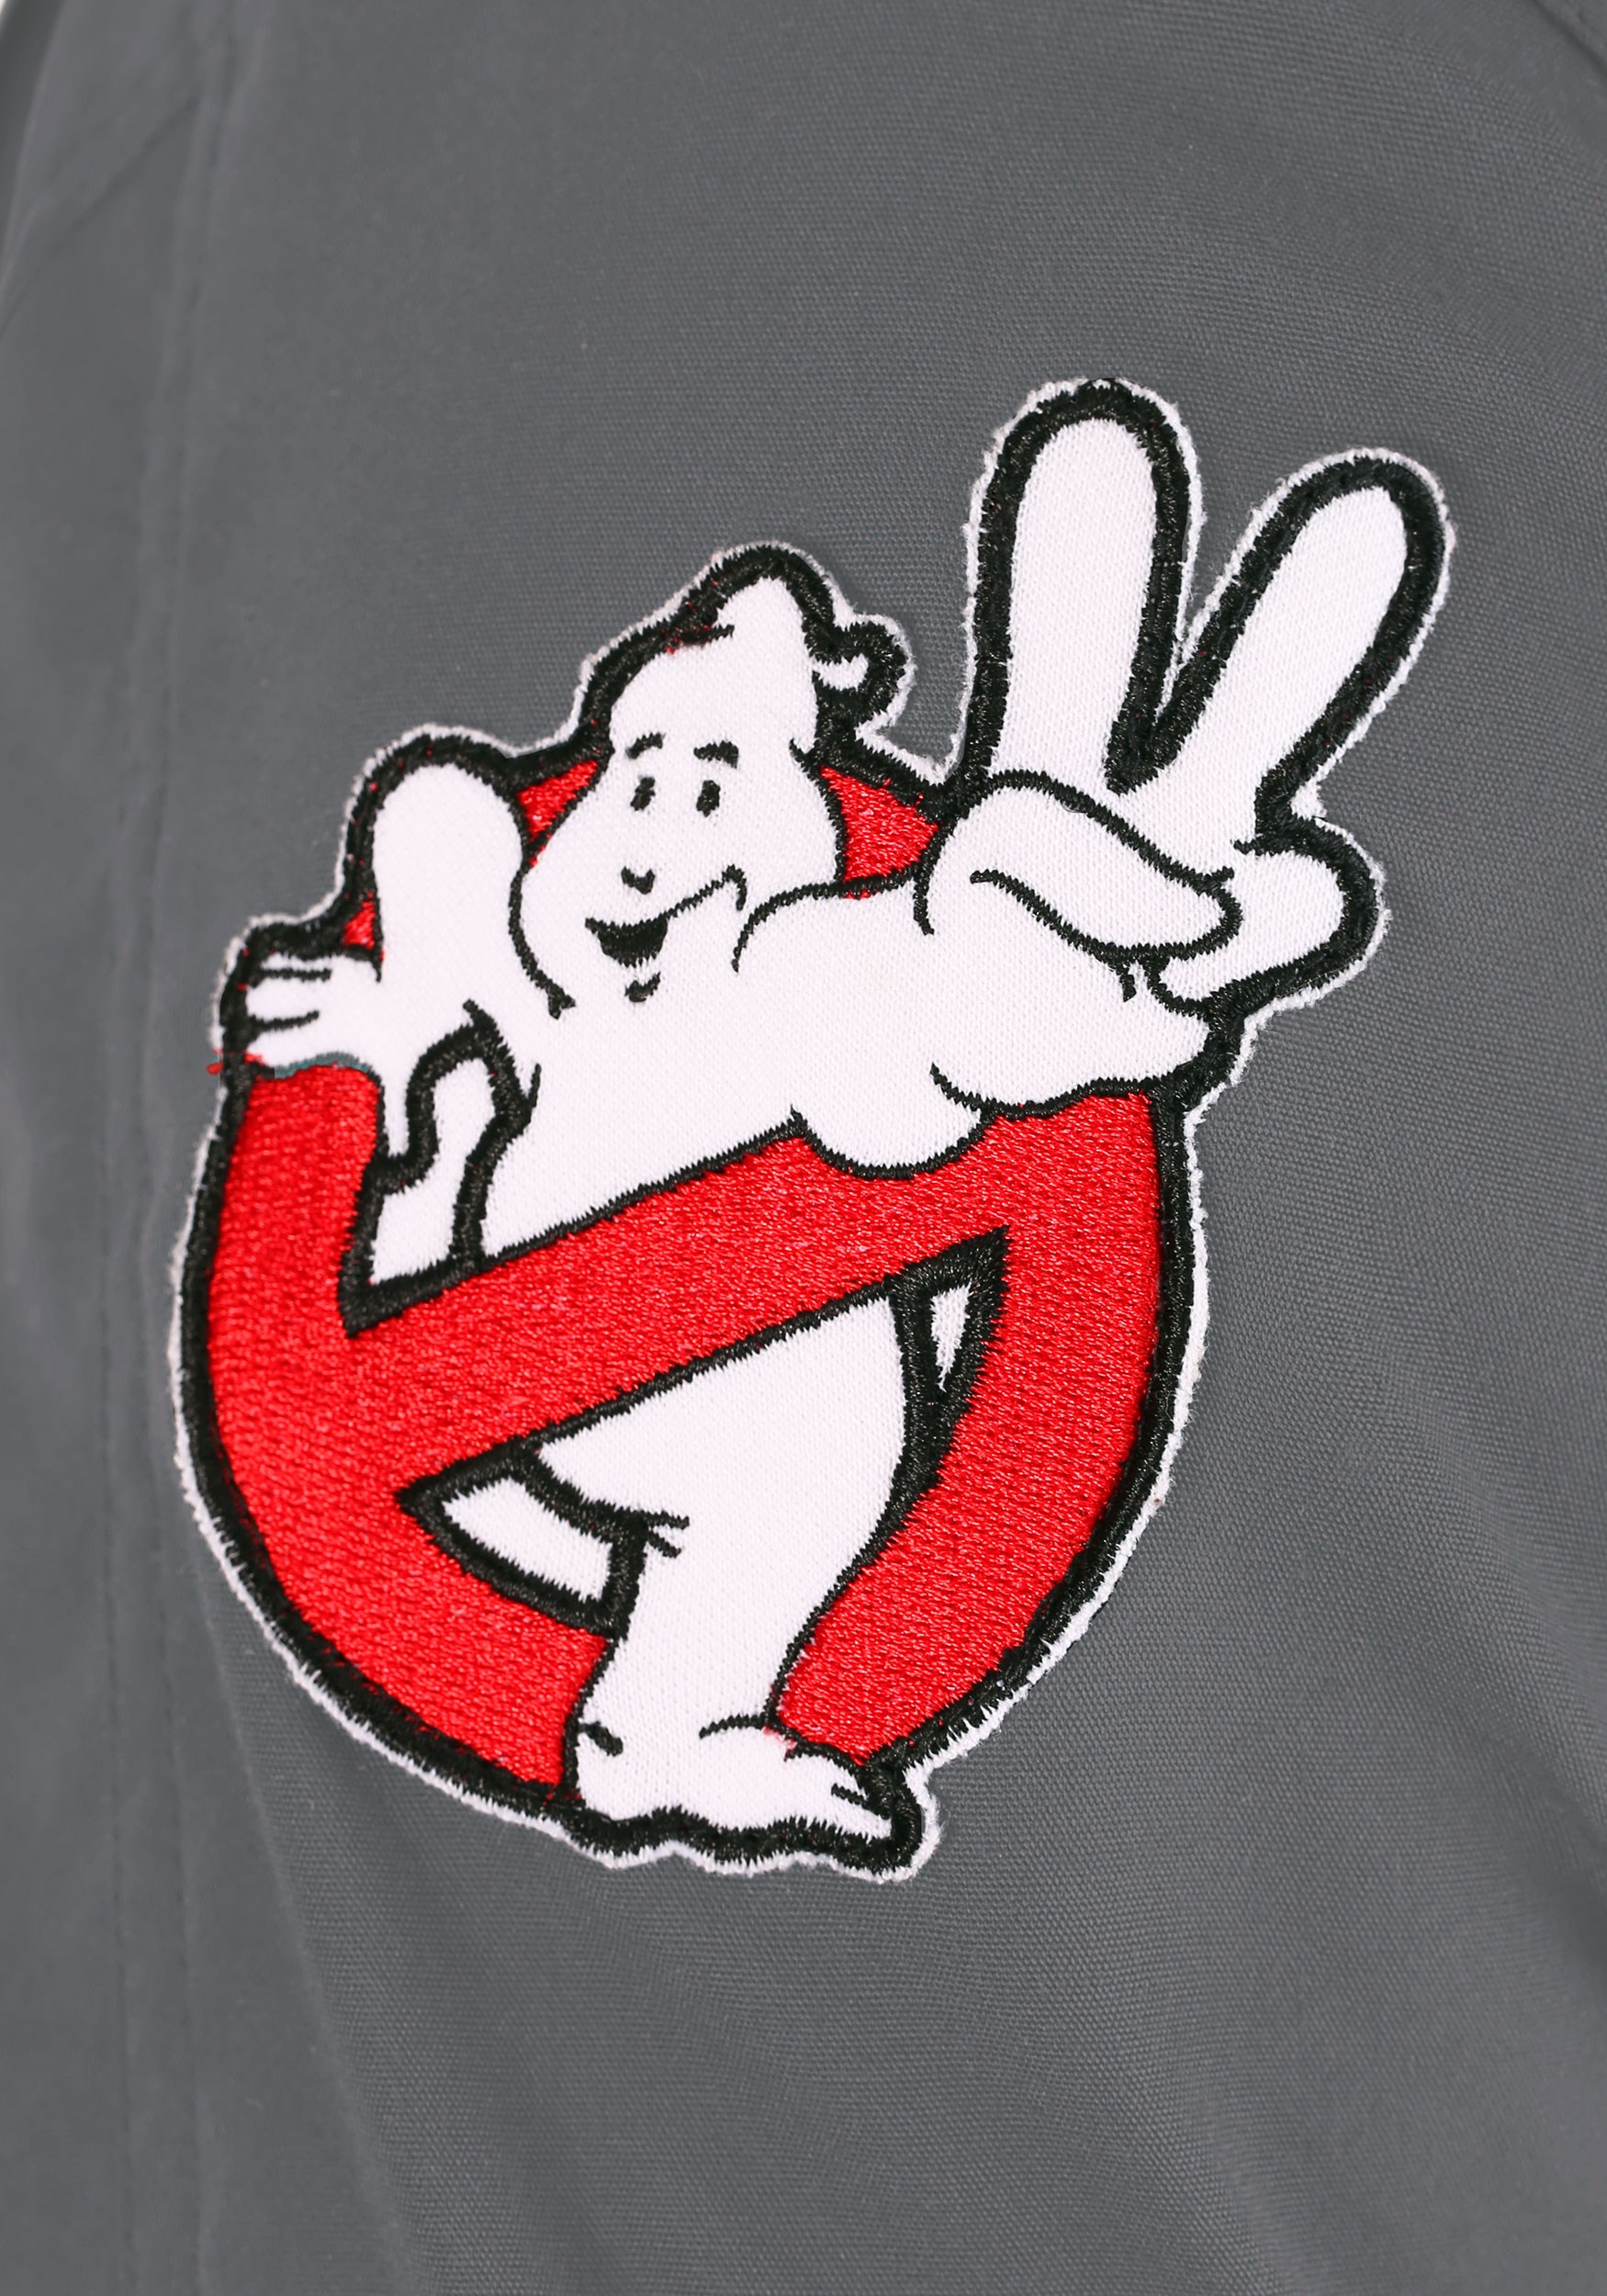 Plus Size Ghostbusters 2 Cosplay Fancy Dress Costume For Men